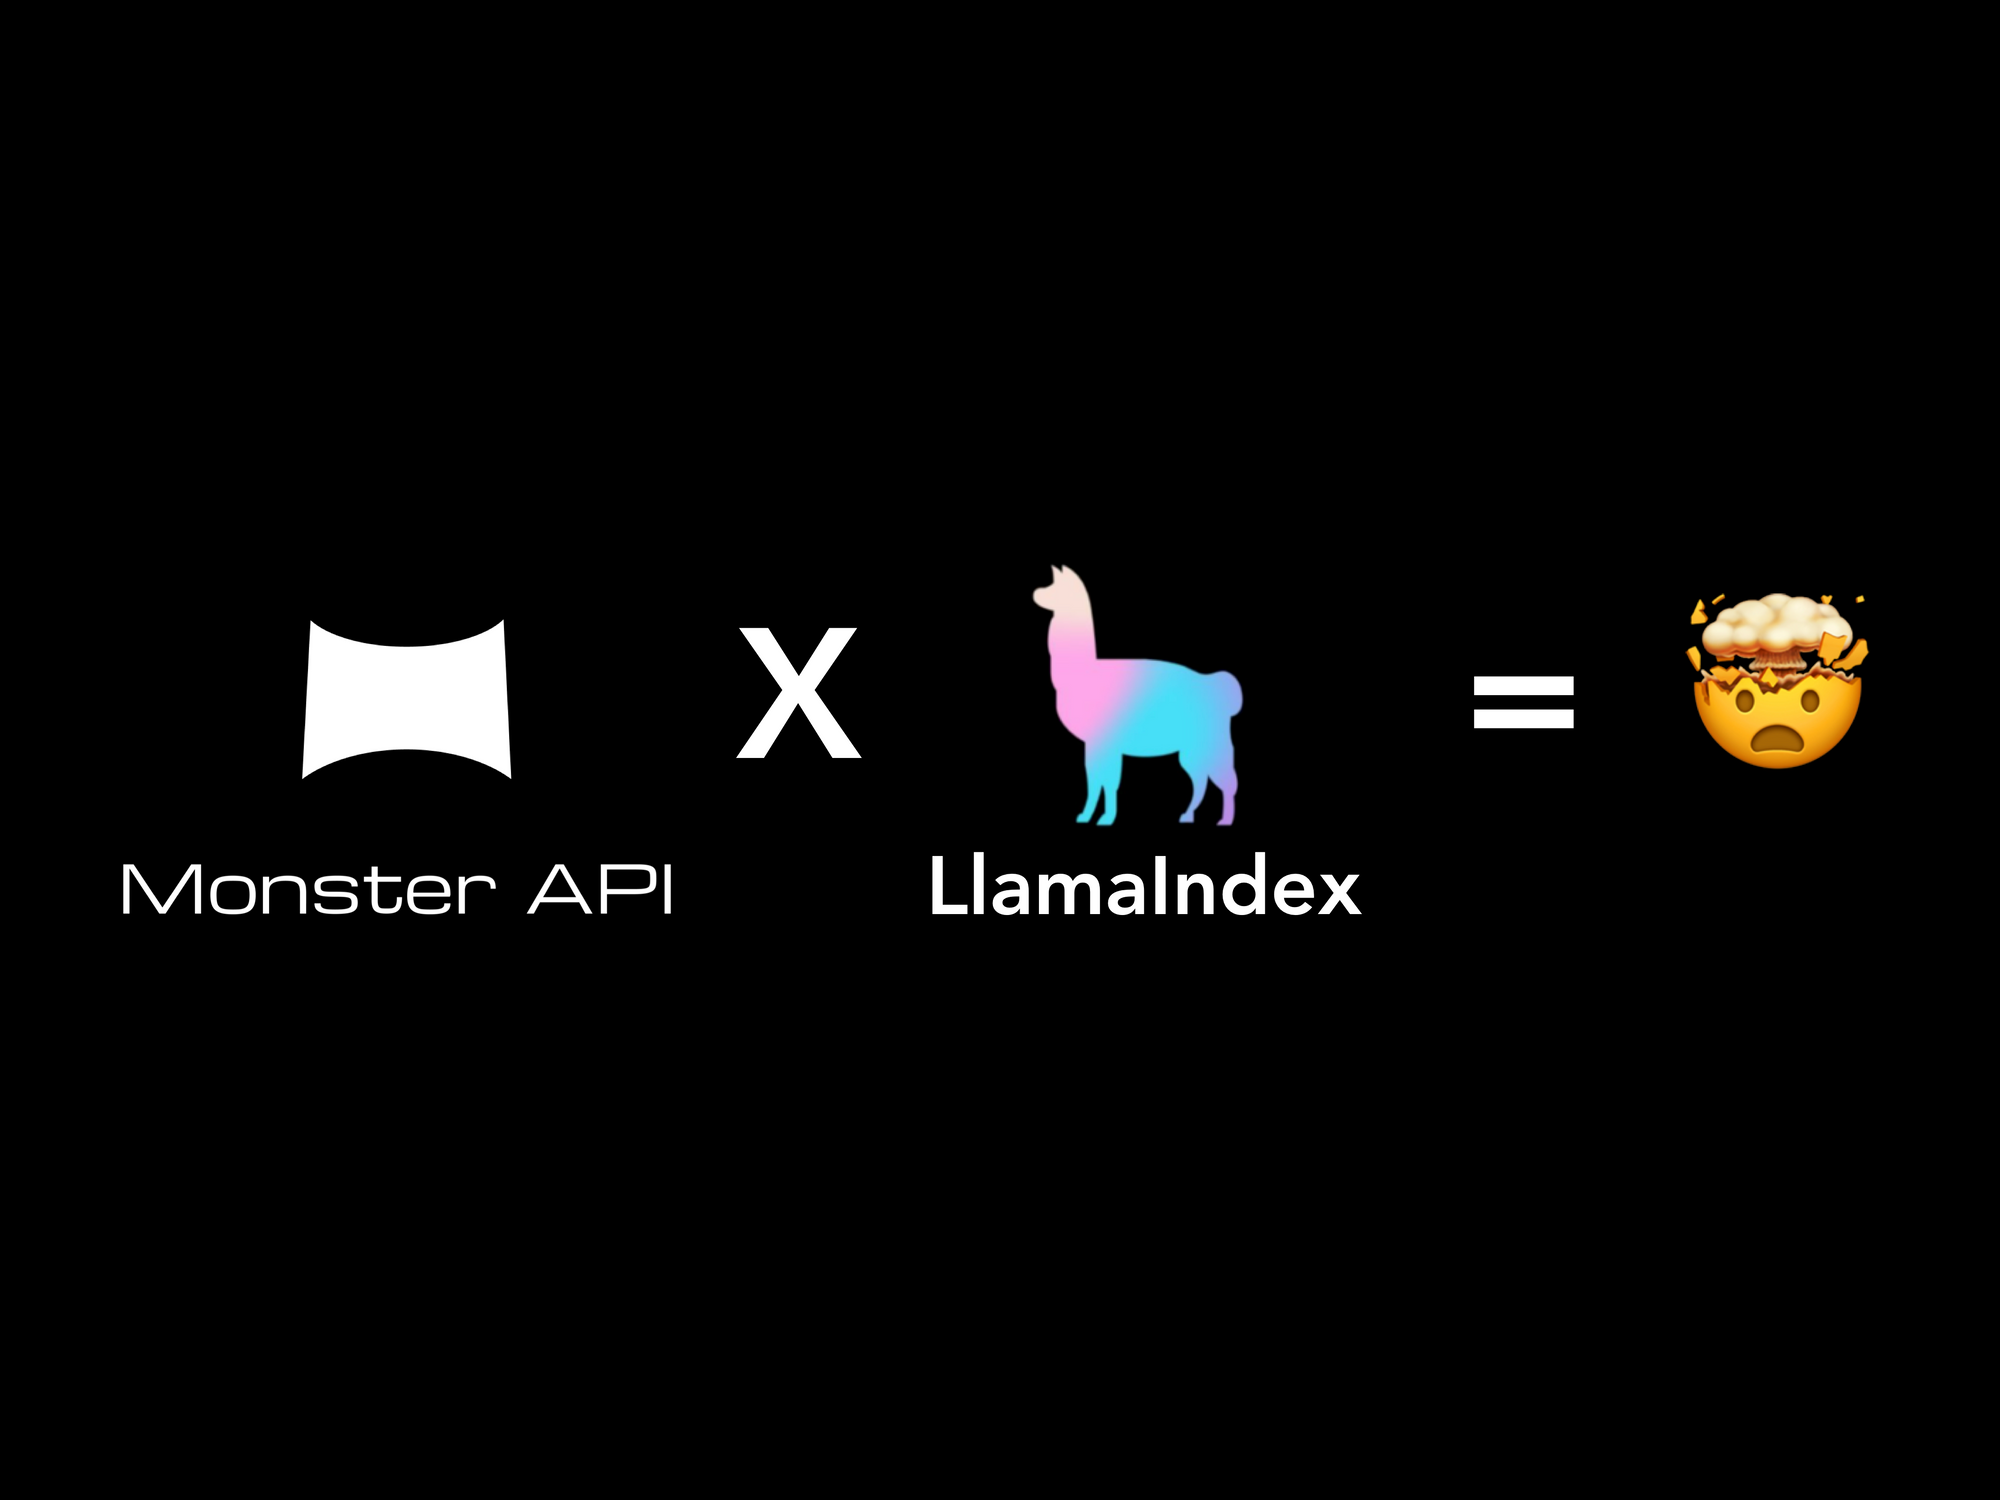 MonsterAPI is now Integrated with Llama Index!